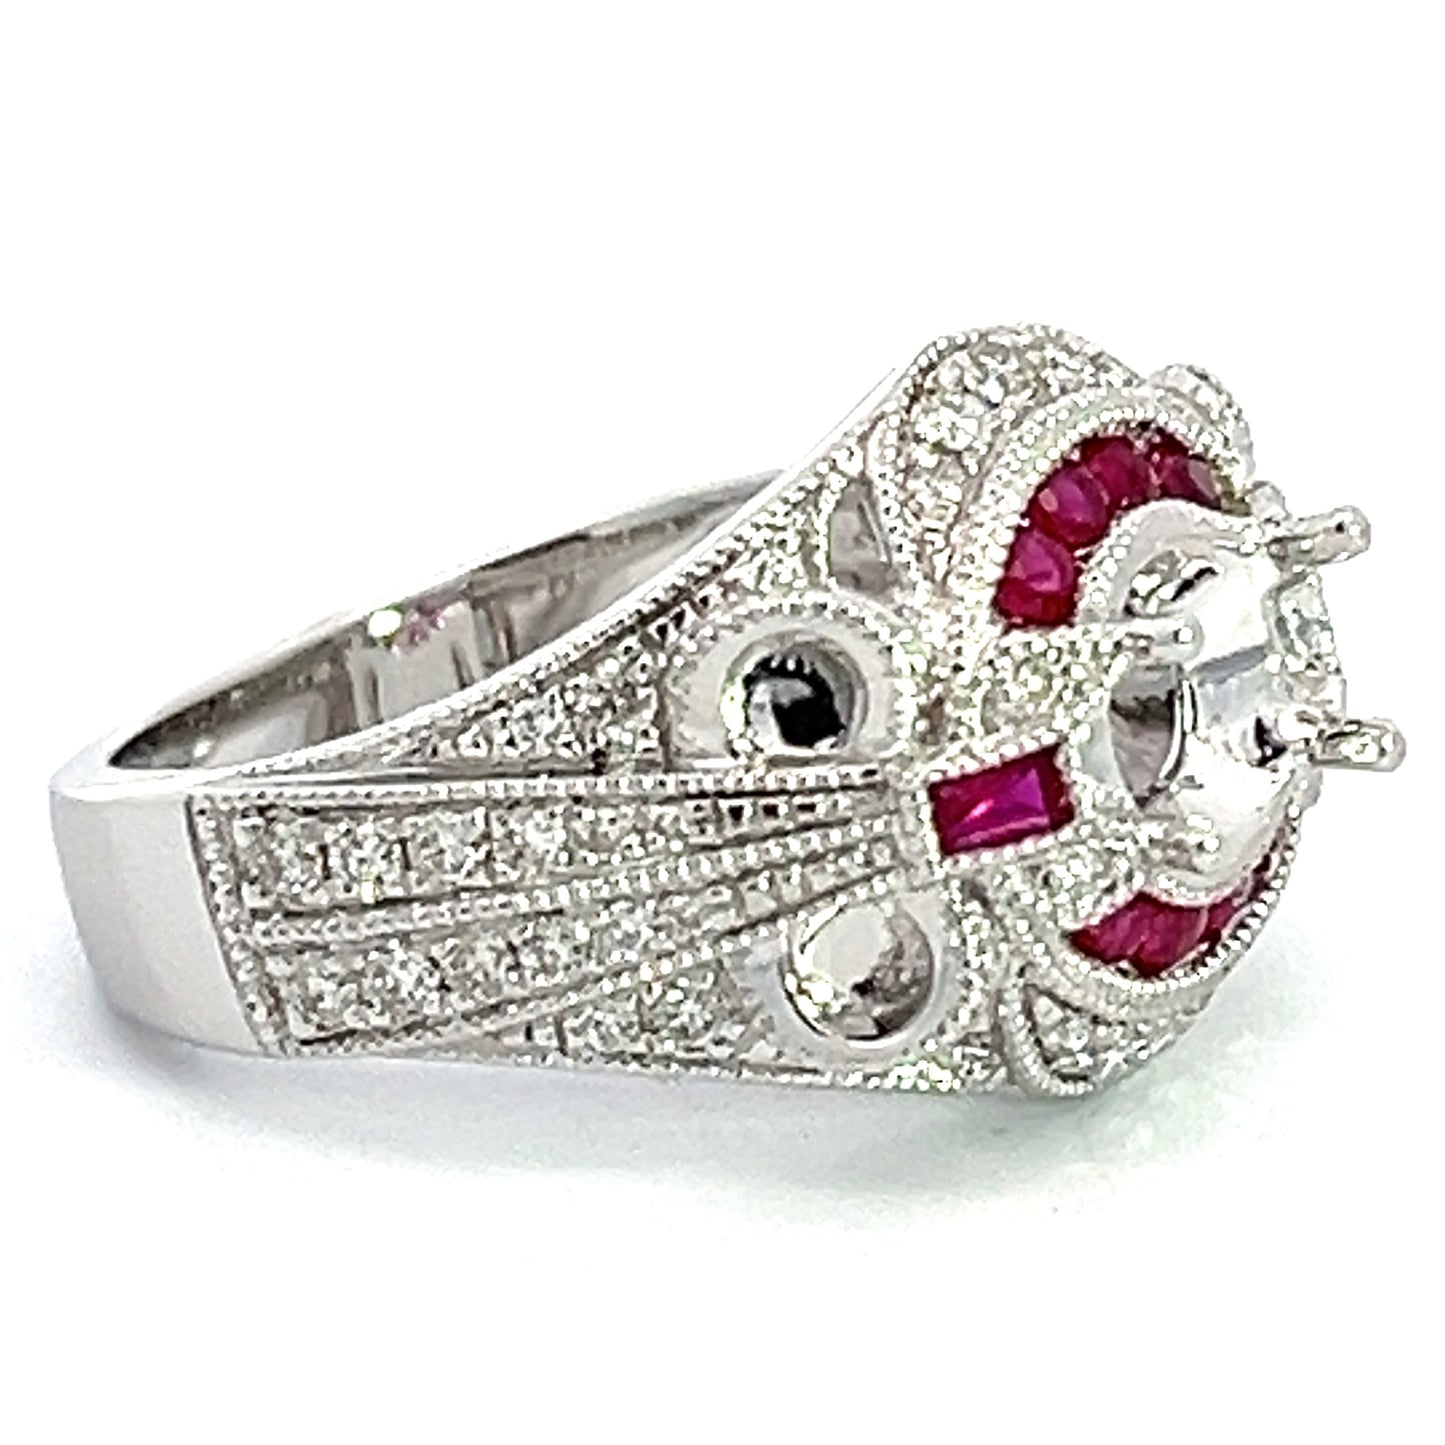 Ruby and Diamond Antique Mounting in White Gold